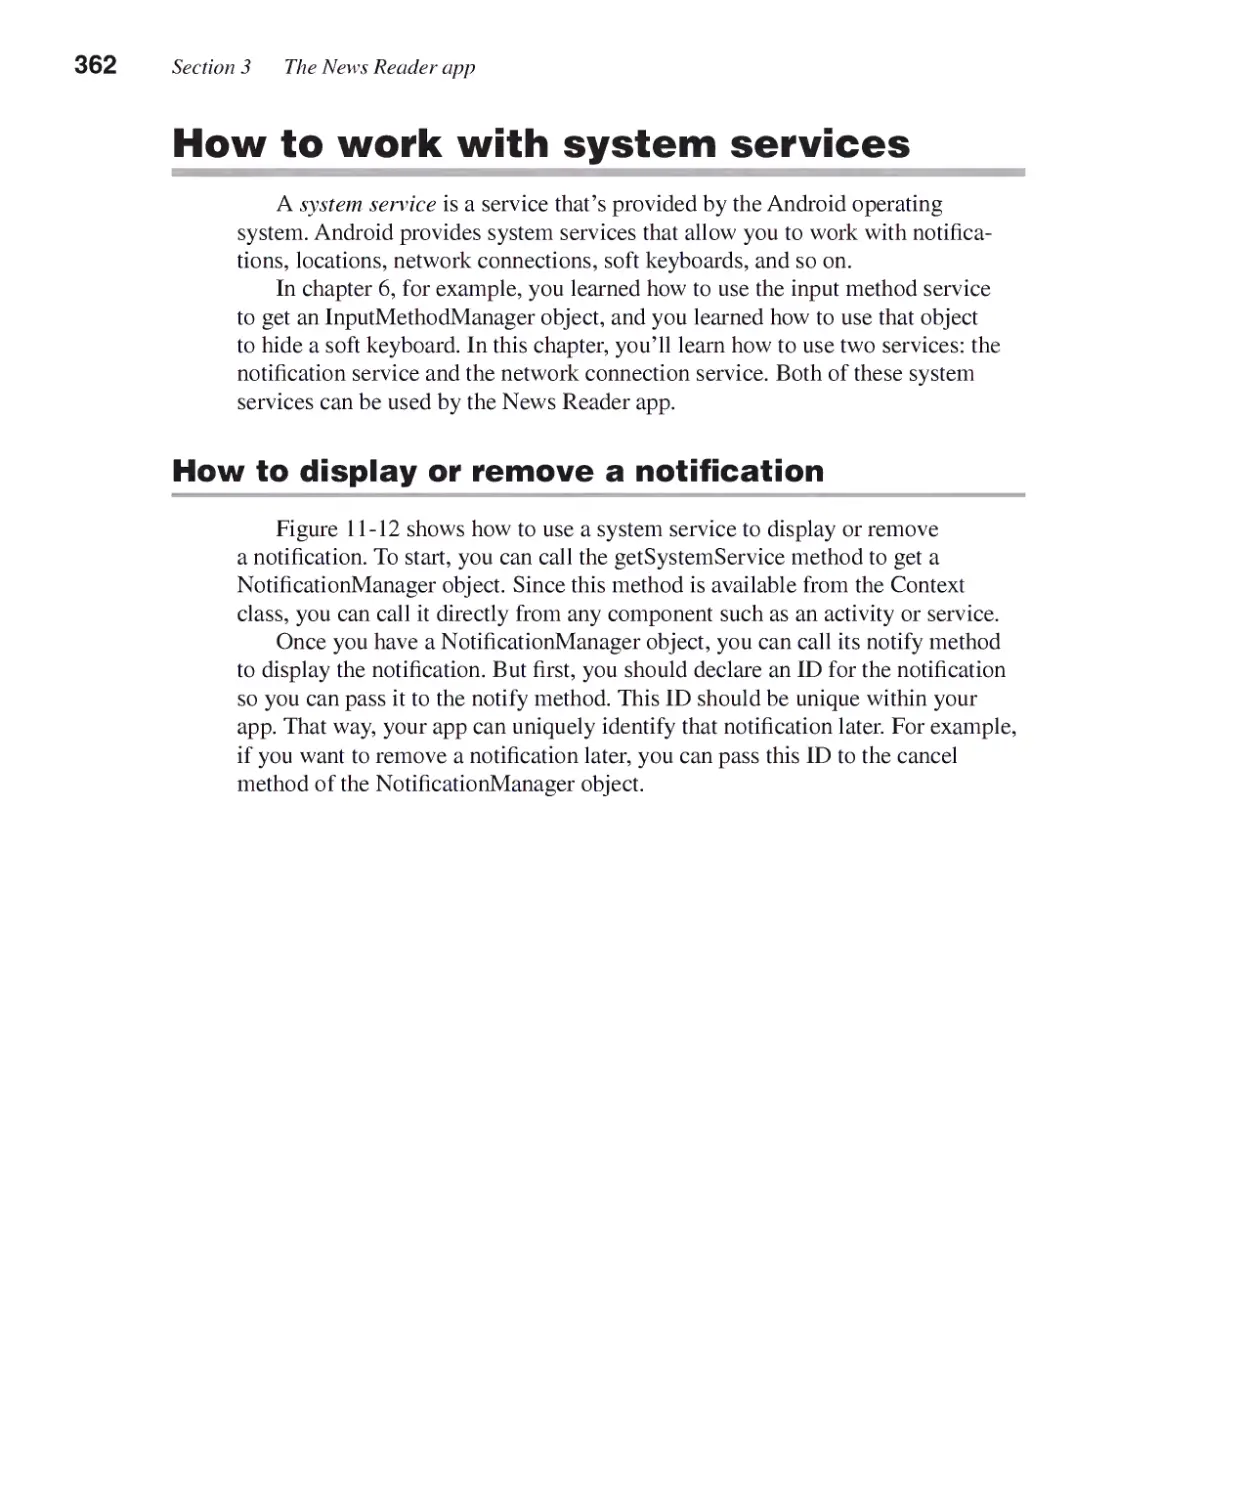 How to Work with System Services